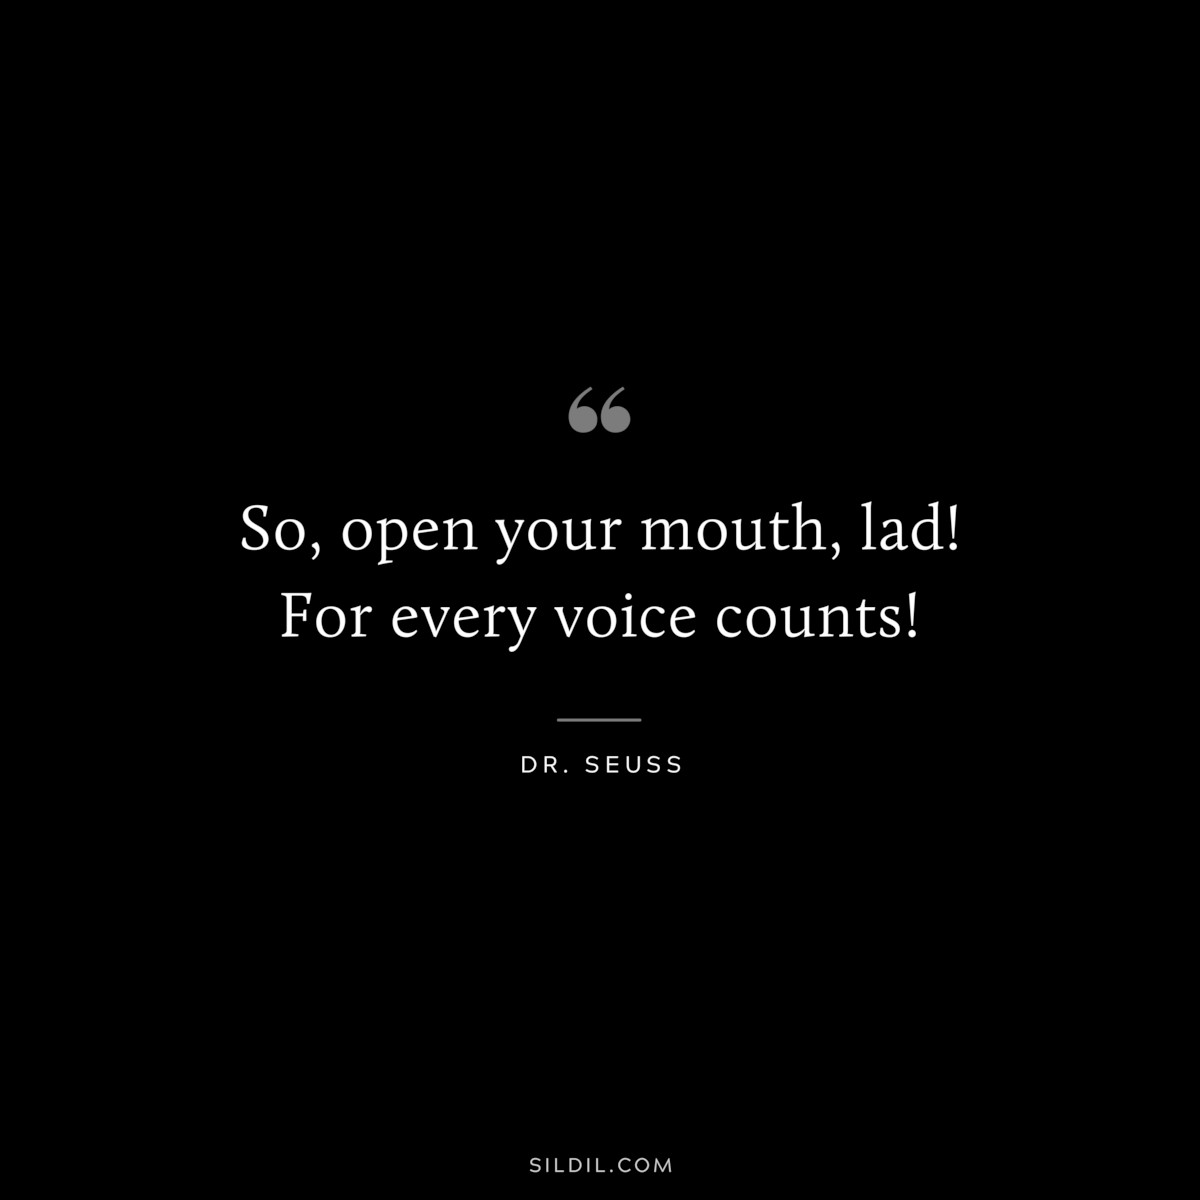 So, open your mouth, lad! For every voice counts! ― Dr. Seuss